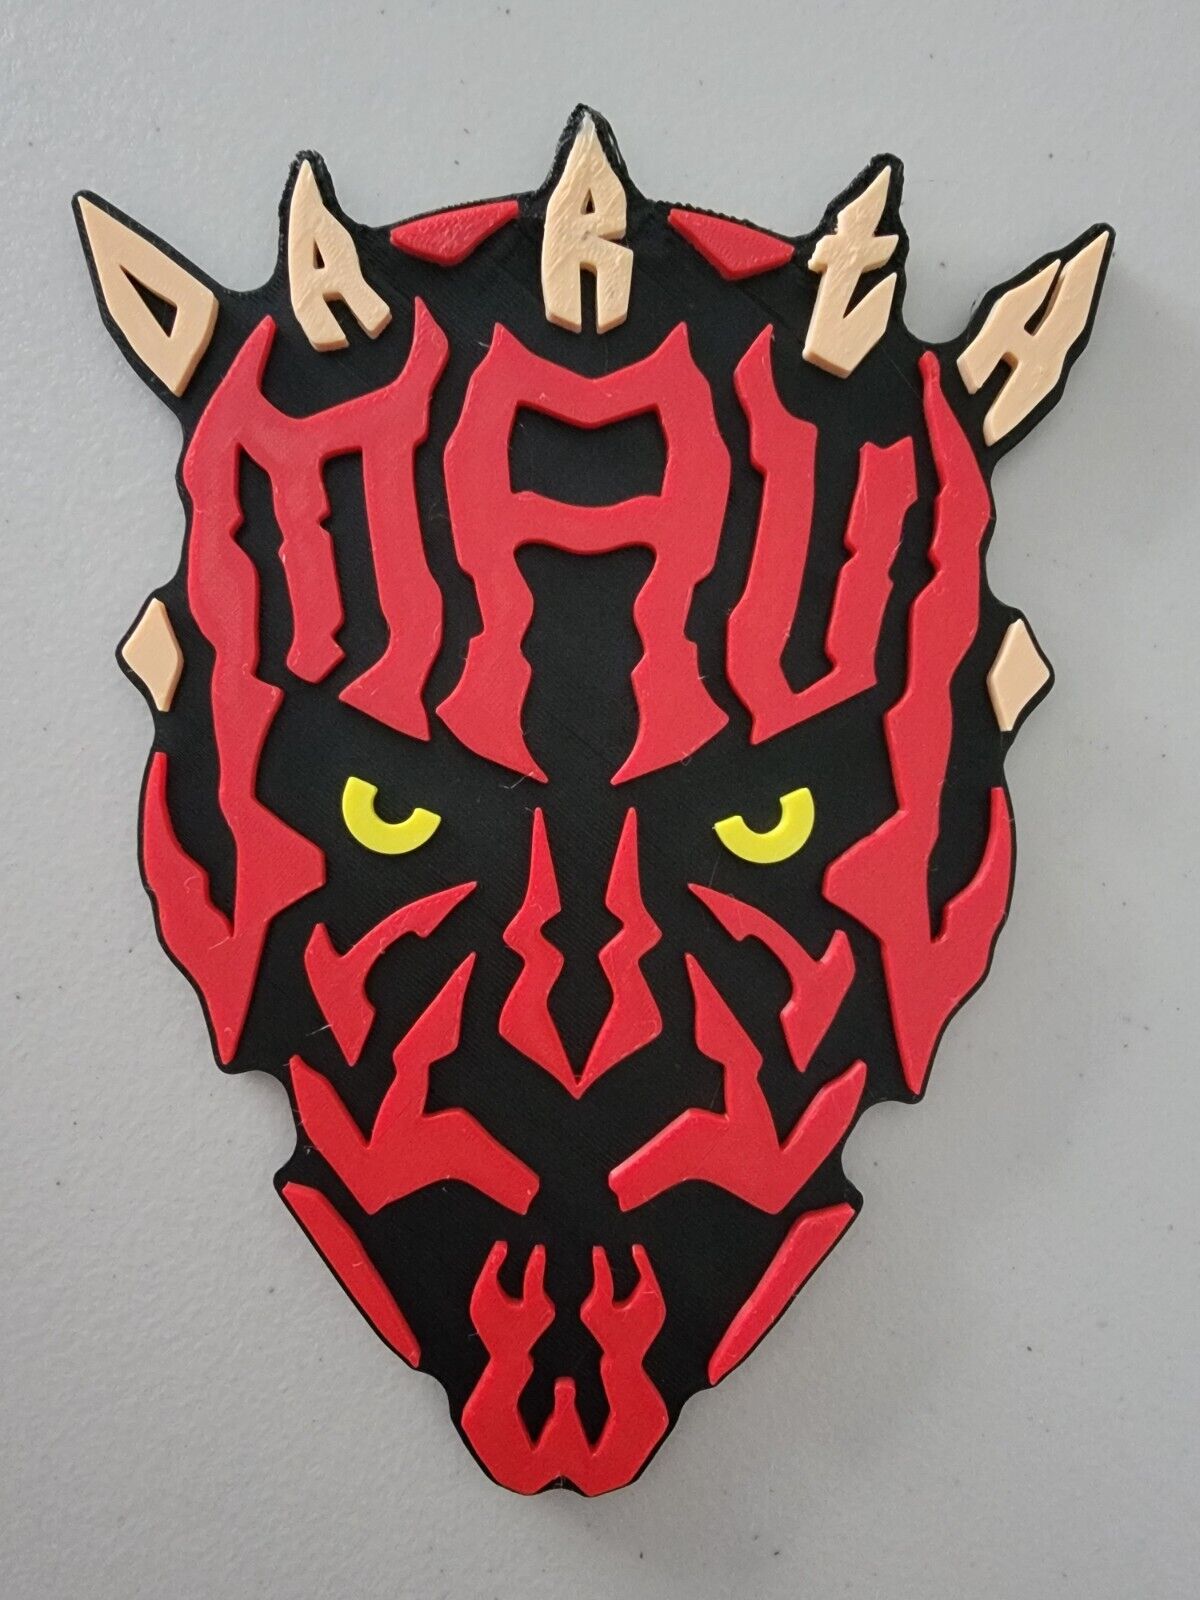 Srar Wars- Darth Maul - Wall Art - May The 4th Be With You